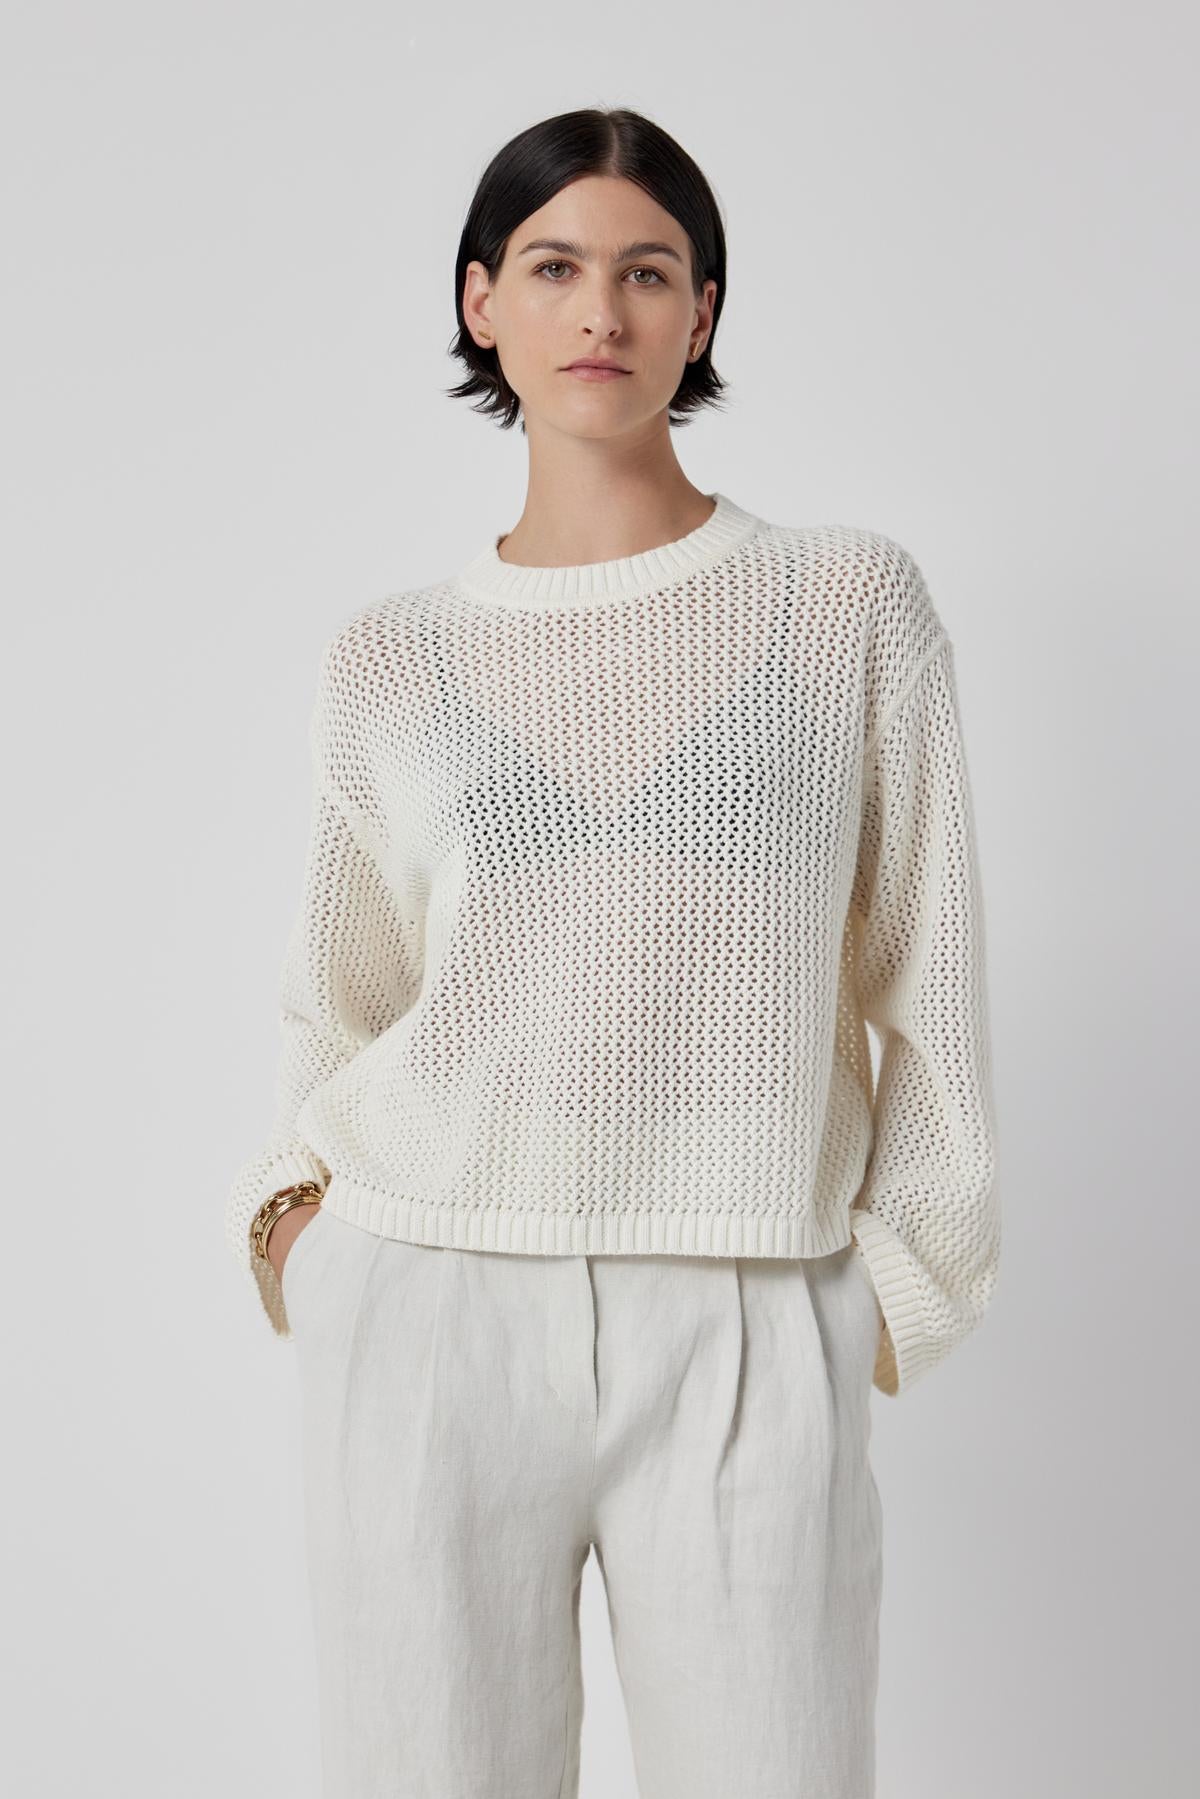 The model is wearing a lightweight KANAN SWEATER by Velvet by Jenny Graham and white trousers.-36168698527937